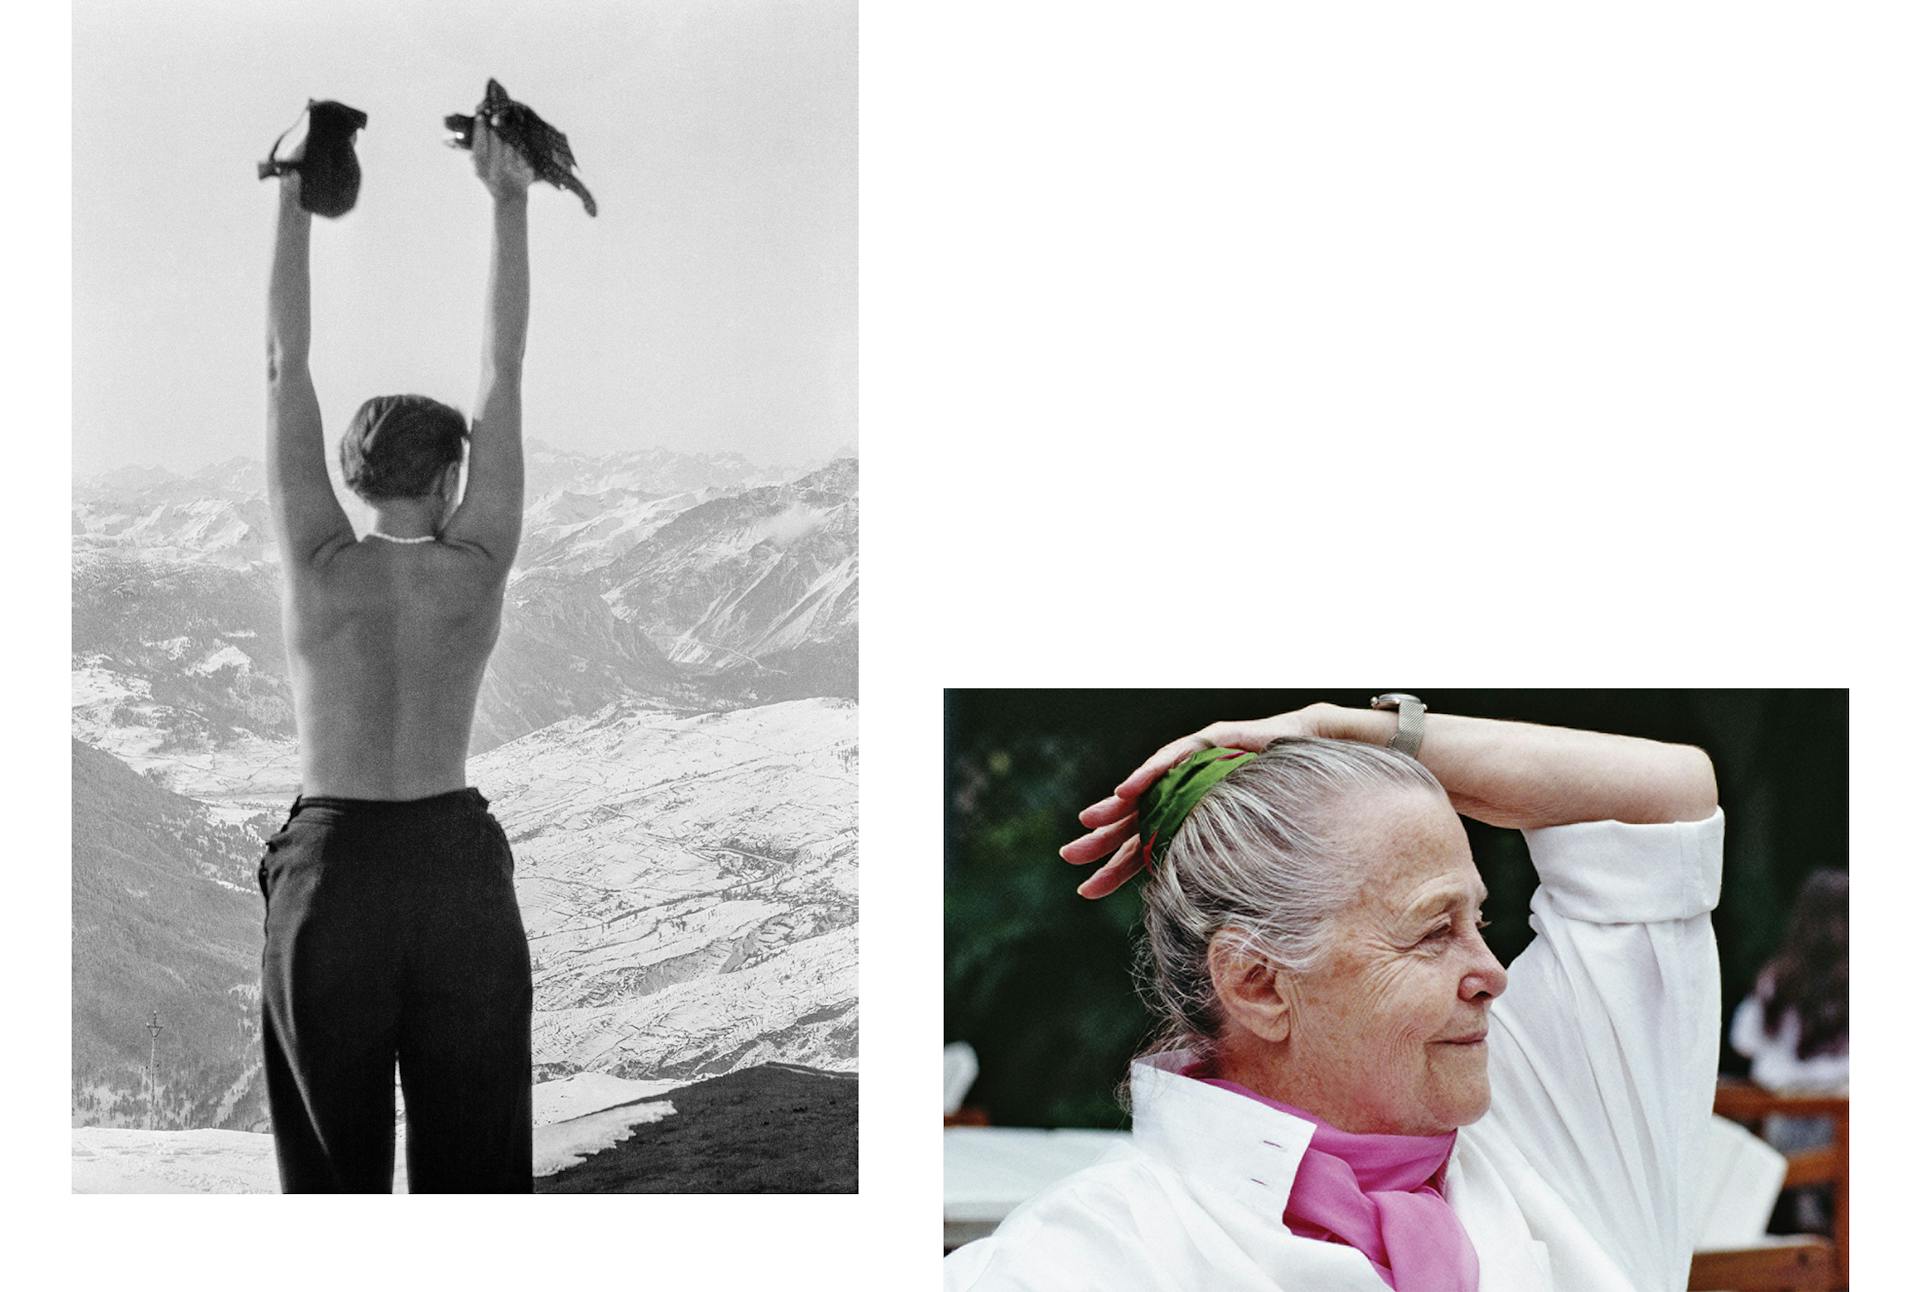 Two images. The first is a black and white image of a woman in the mountains. The second is of a woman in a pink and white outfit.